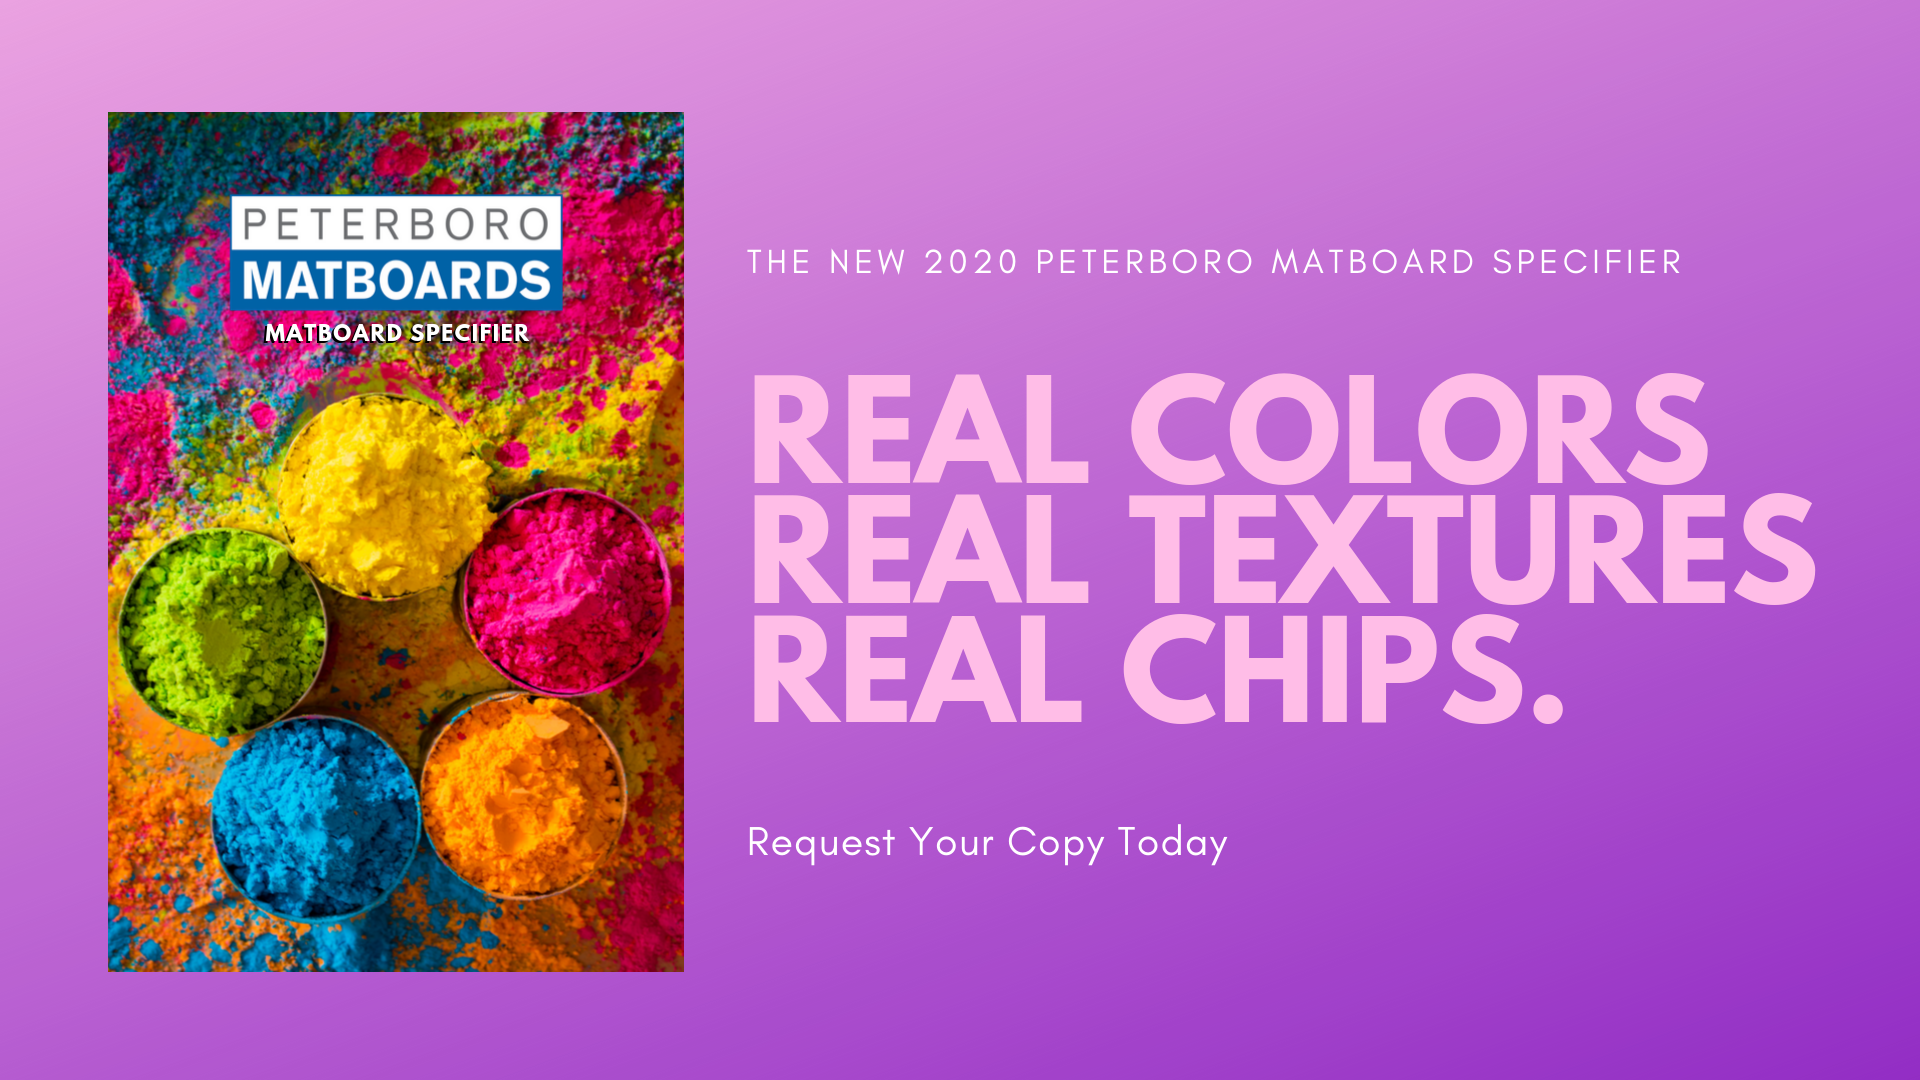 The New 2020 Peterboro Matboard Specifier - Real Colors, Real Textures, Real Chips